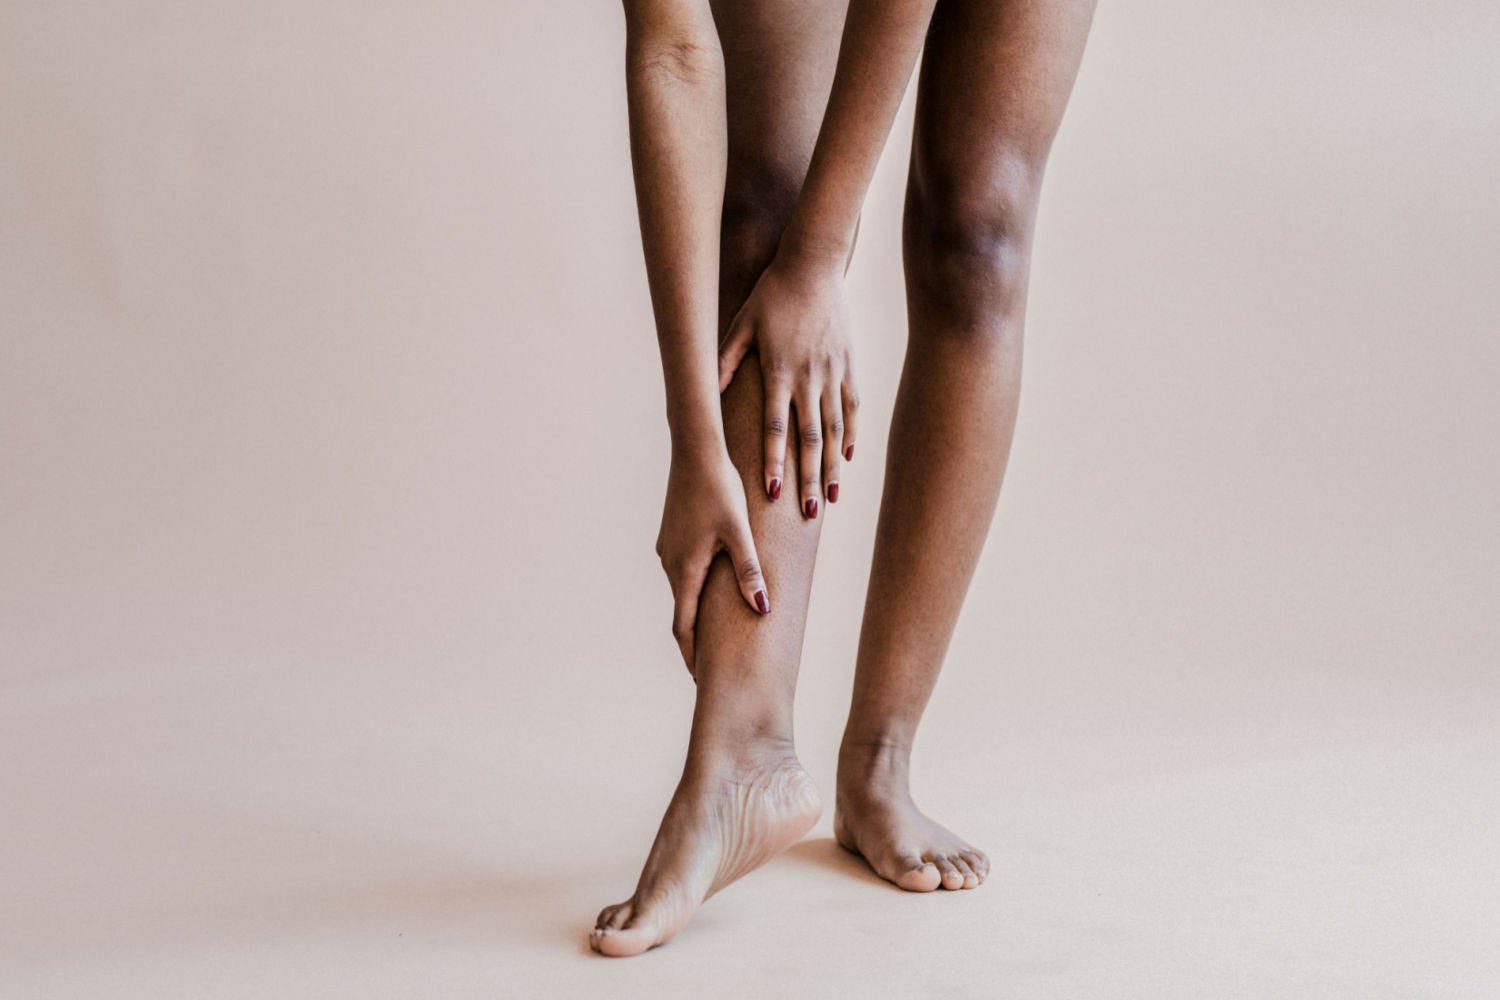 Black woman experiencing soreness and heaviness in her legs due to DVT